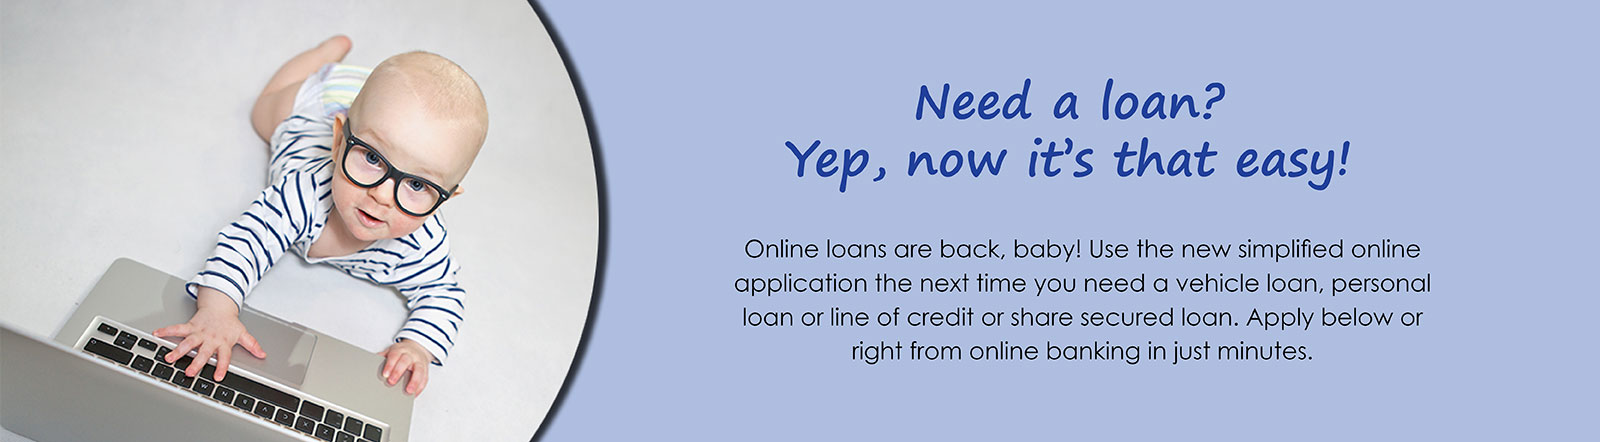 Online loans are back. Use the new simplified online application the next time you need a vehicle, personal, line of credit, or share secured loan.